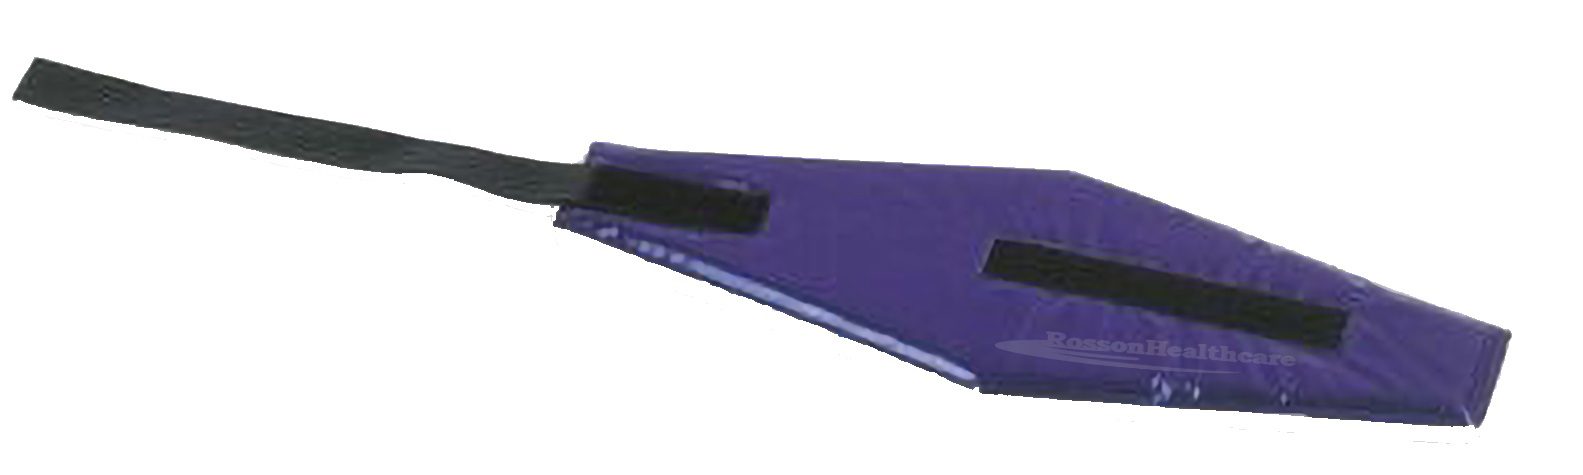 A purple airplane with black trim on the side.